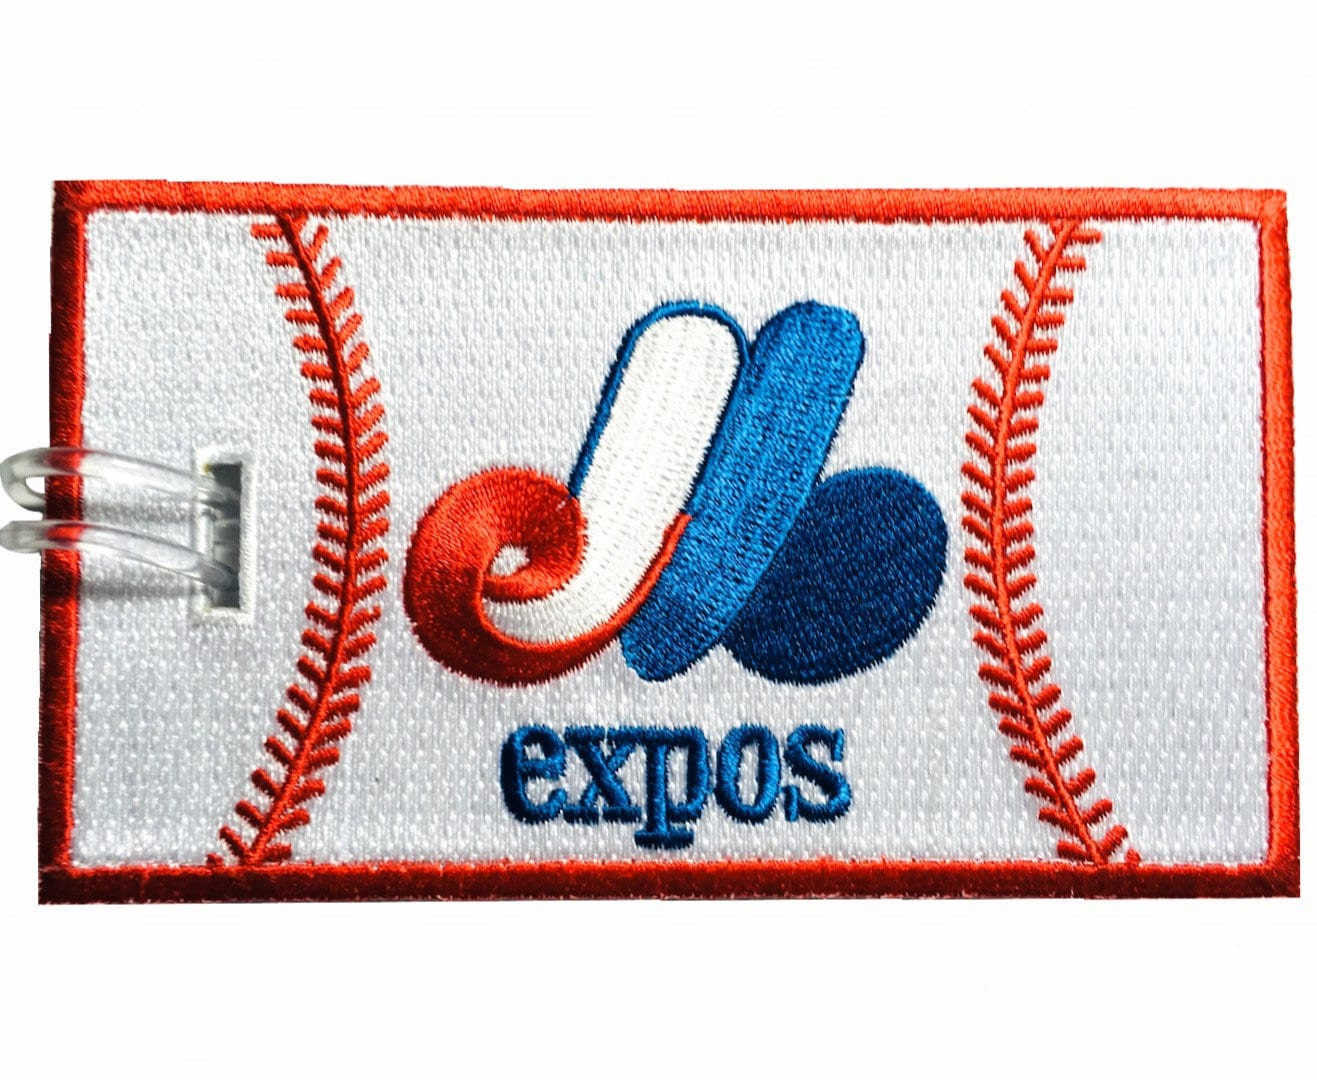 NEVER BREAKS! Montreal Expos Embroidered Luggage Tag 